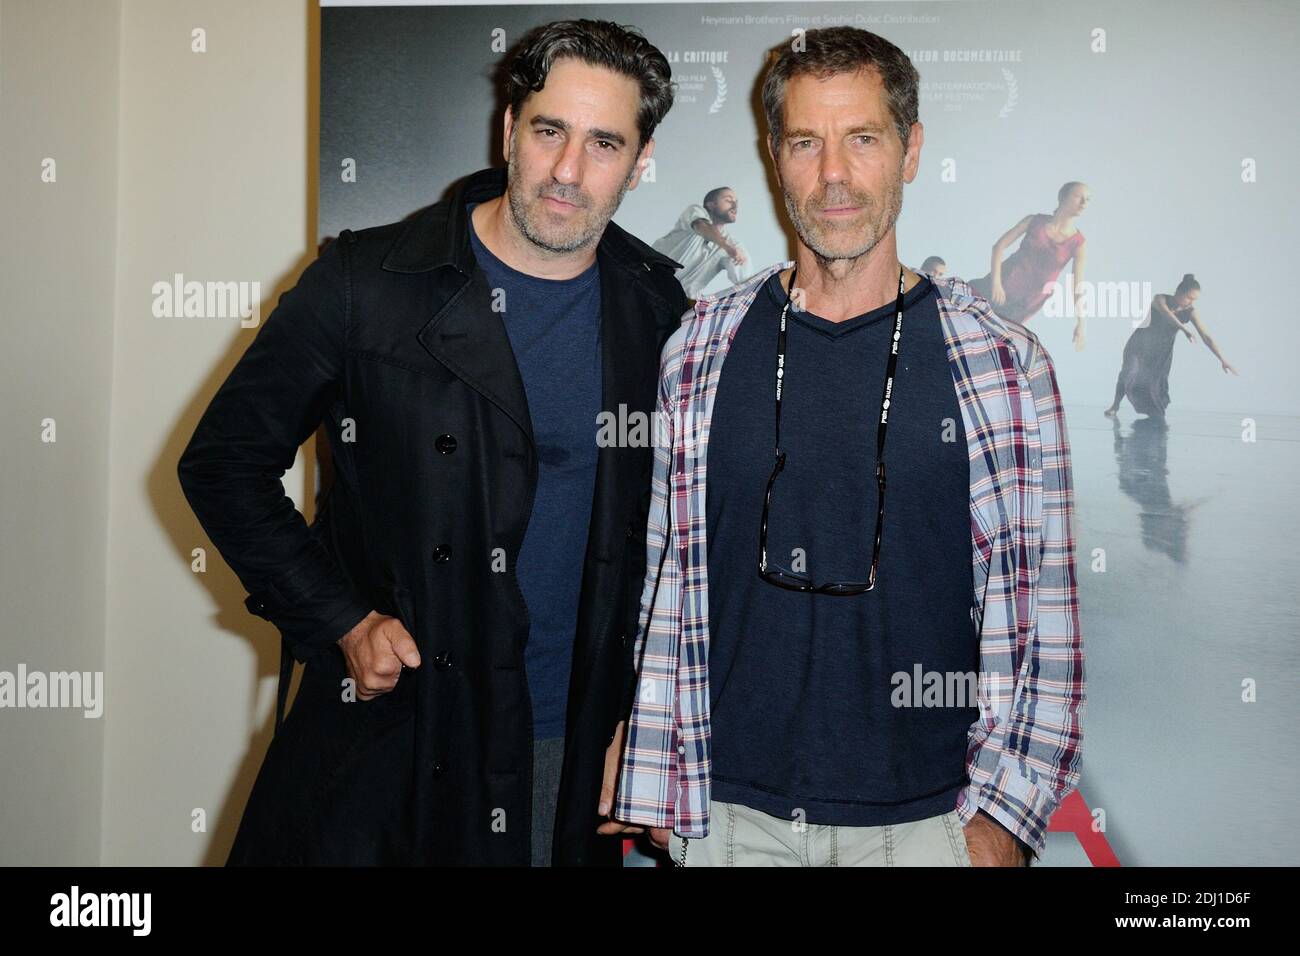 Director Tomer and Ohad attending the 'Mr Gaga' Premiere at the Cinema l'Arlequin in Paris, France on May 26, 2016. Photo by Aurore Marechal/ABACAPRESS.COM Stock Photo -